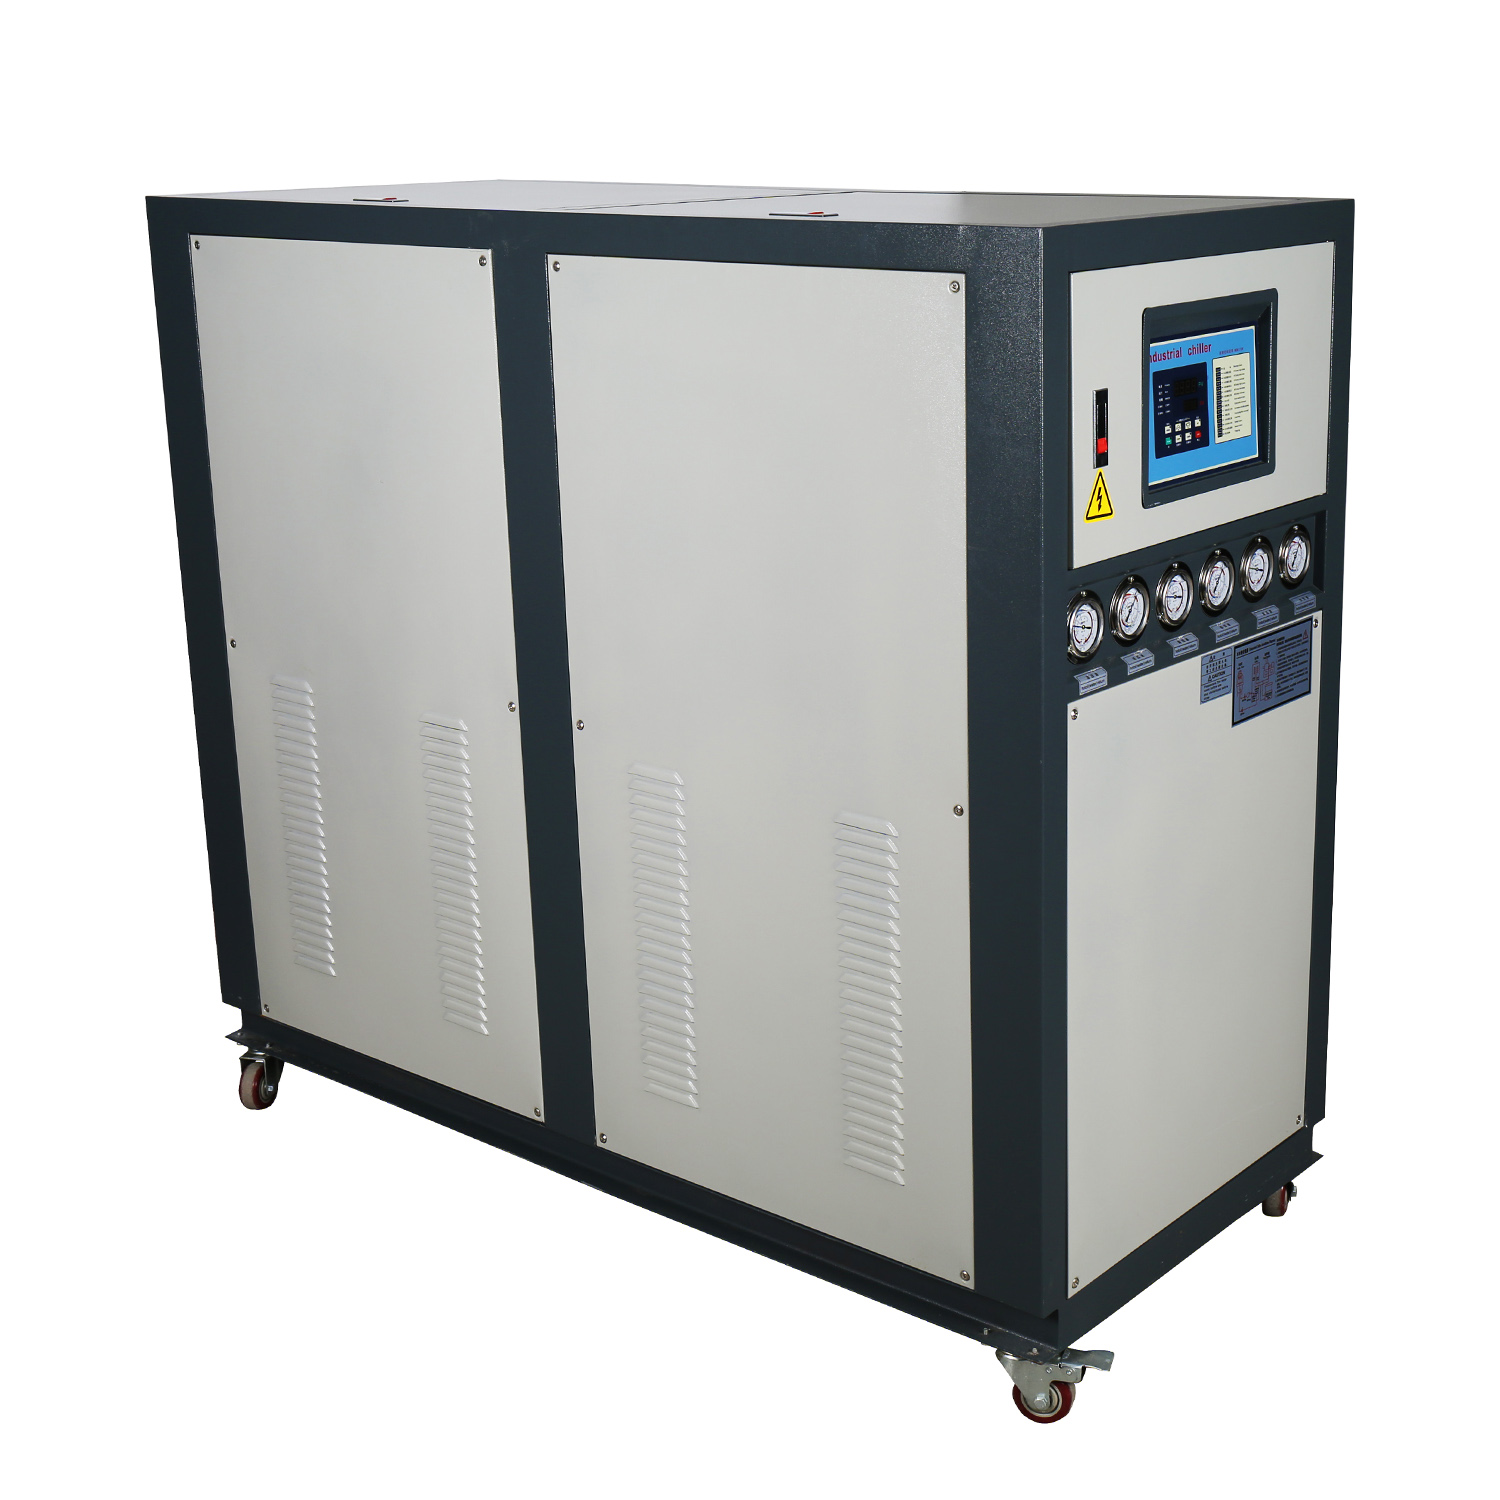 Water-cooled box (closed) industrial chiller